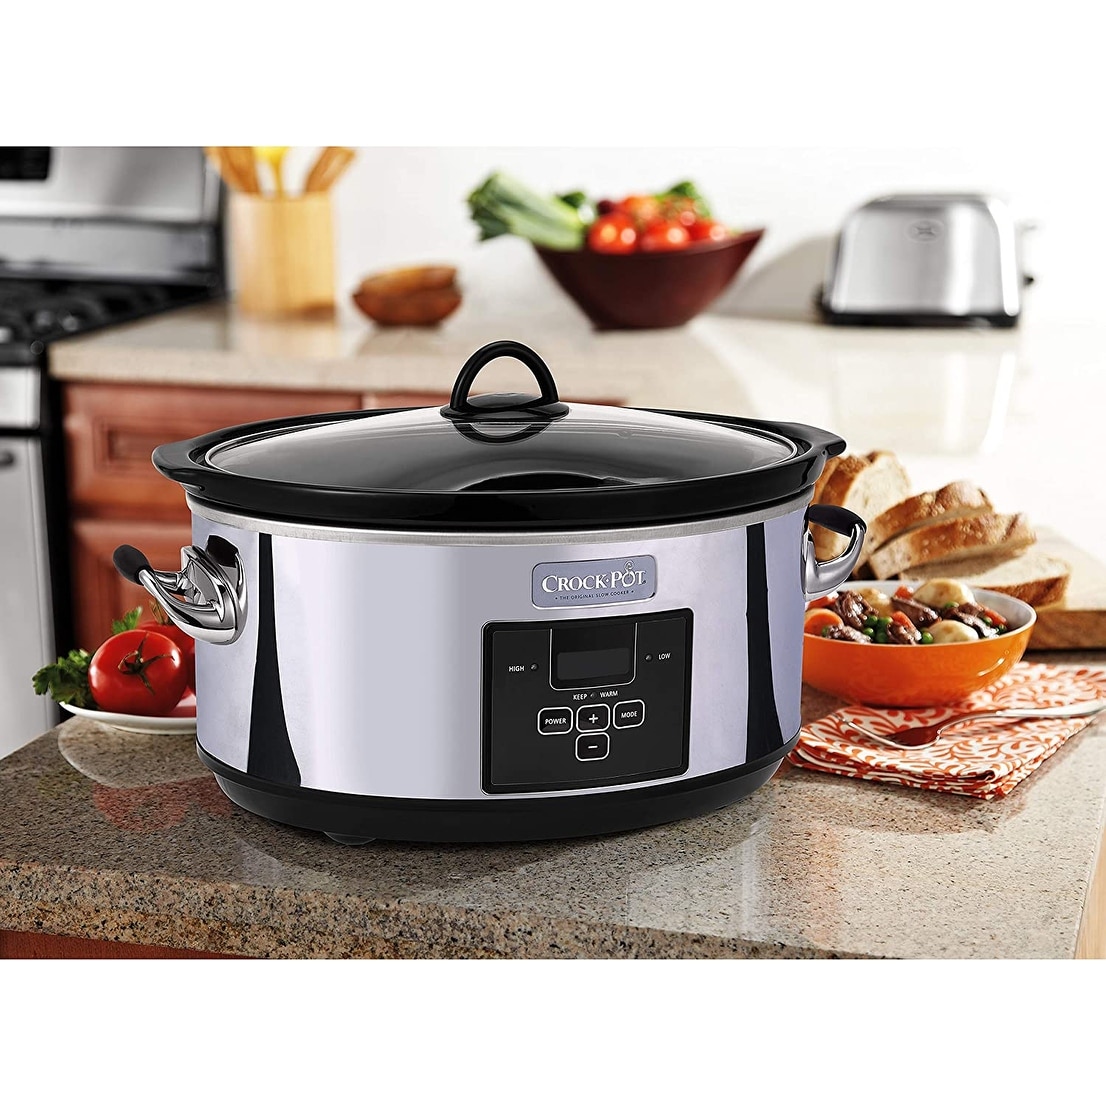 https://ak1.ostkcdn.com/images/products/is/images/direct/fe90c66981e3f3d5590bb248cb10fd9d9eb1b5bc/7-Quart-Slow-Cooker-with-Programmable-Controls-and-Digital-Timer%2C-Polished-Platinum.jpg